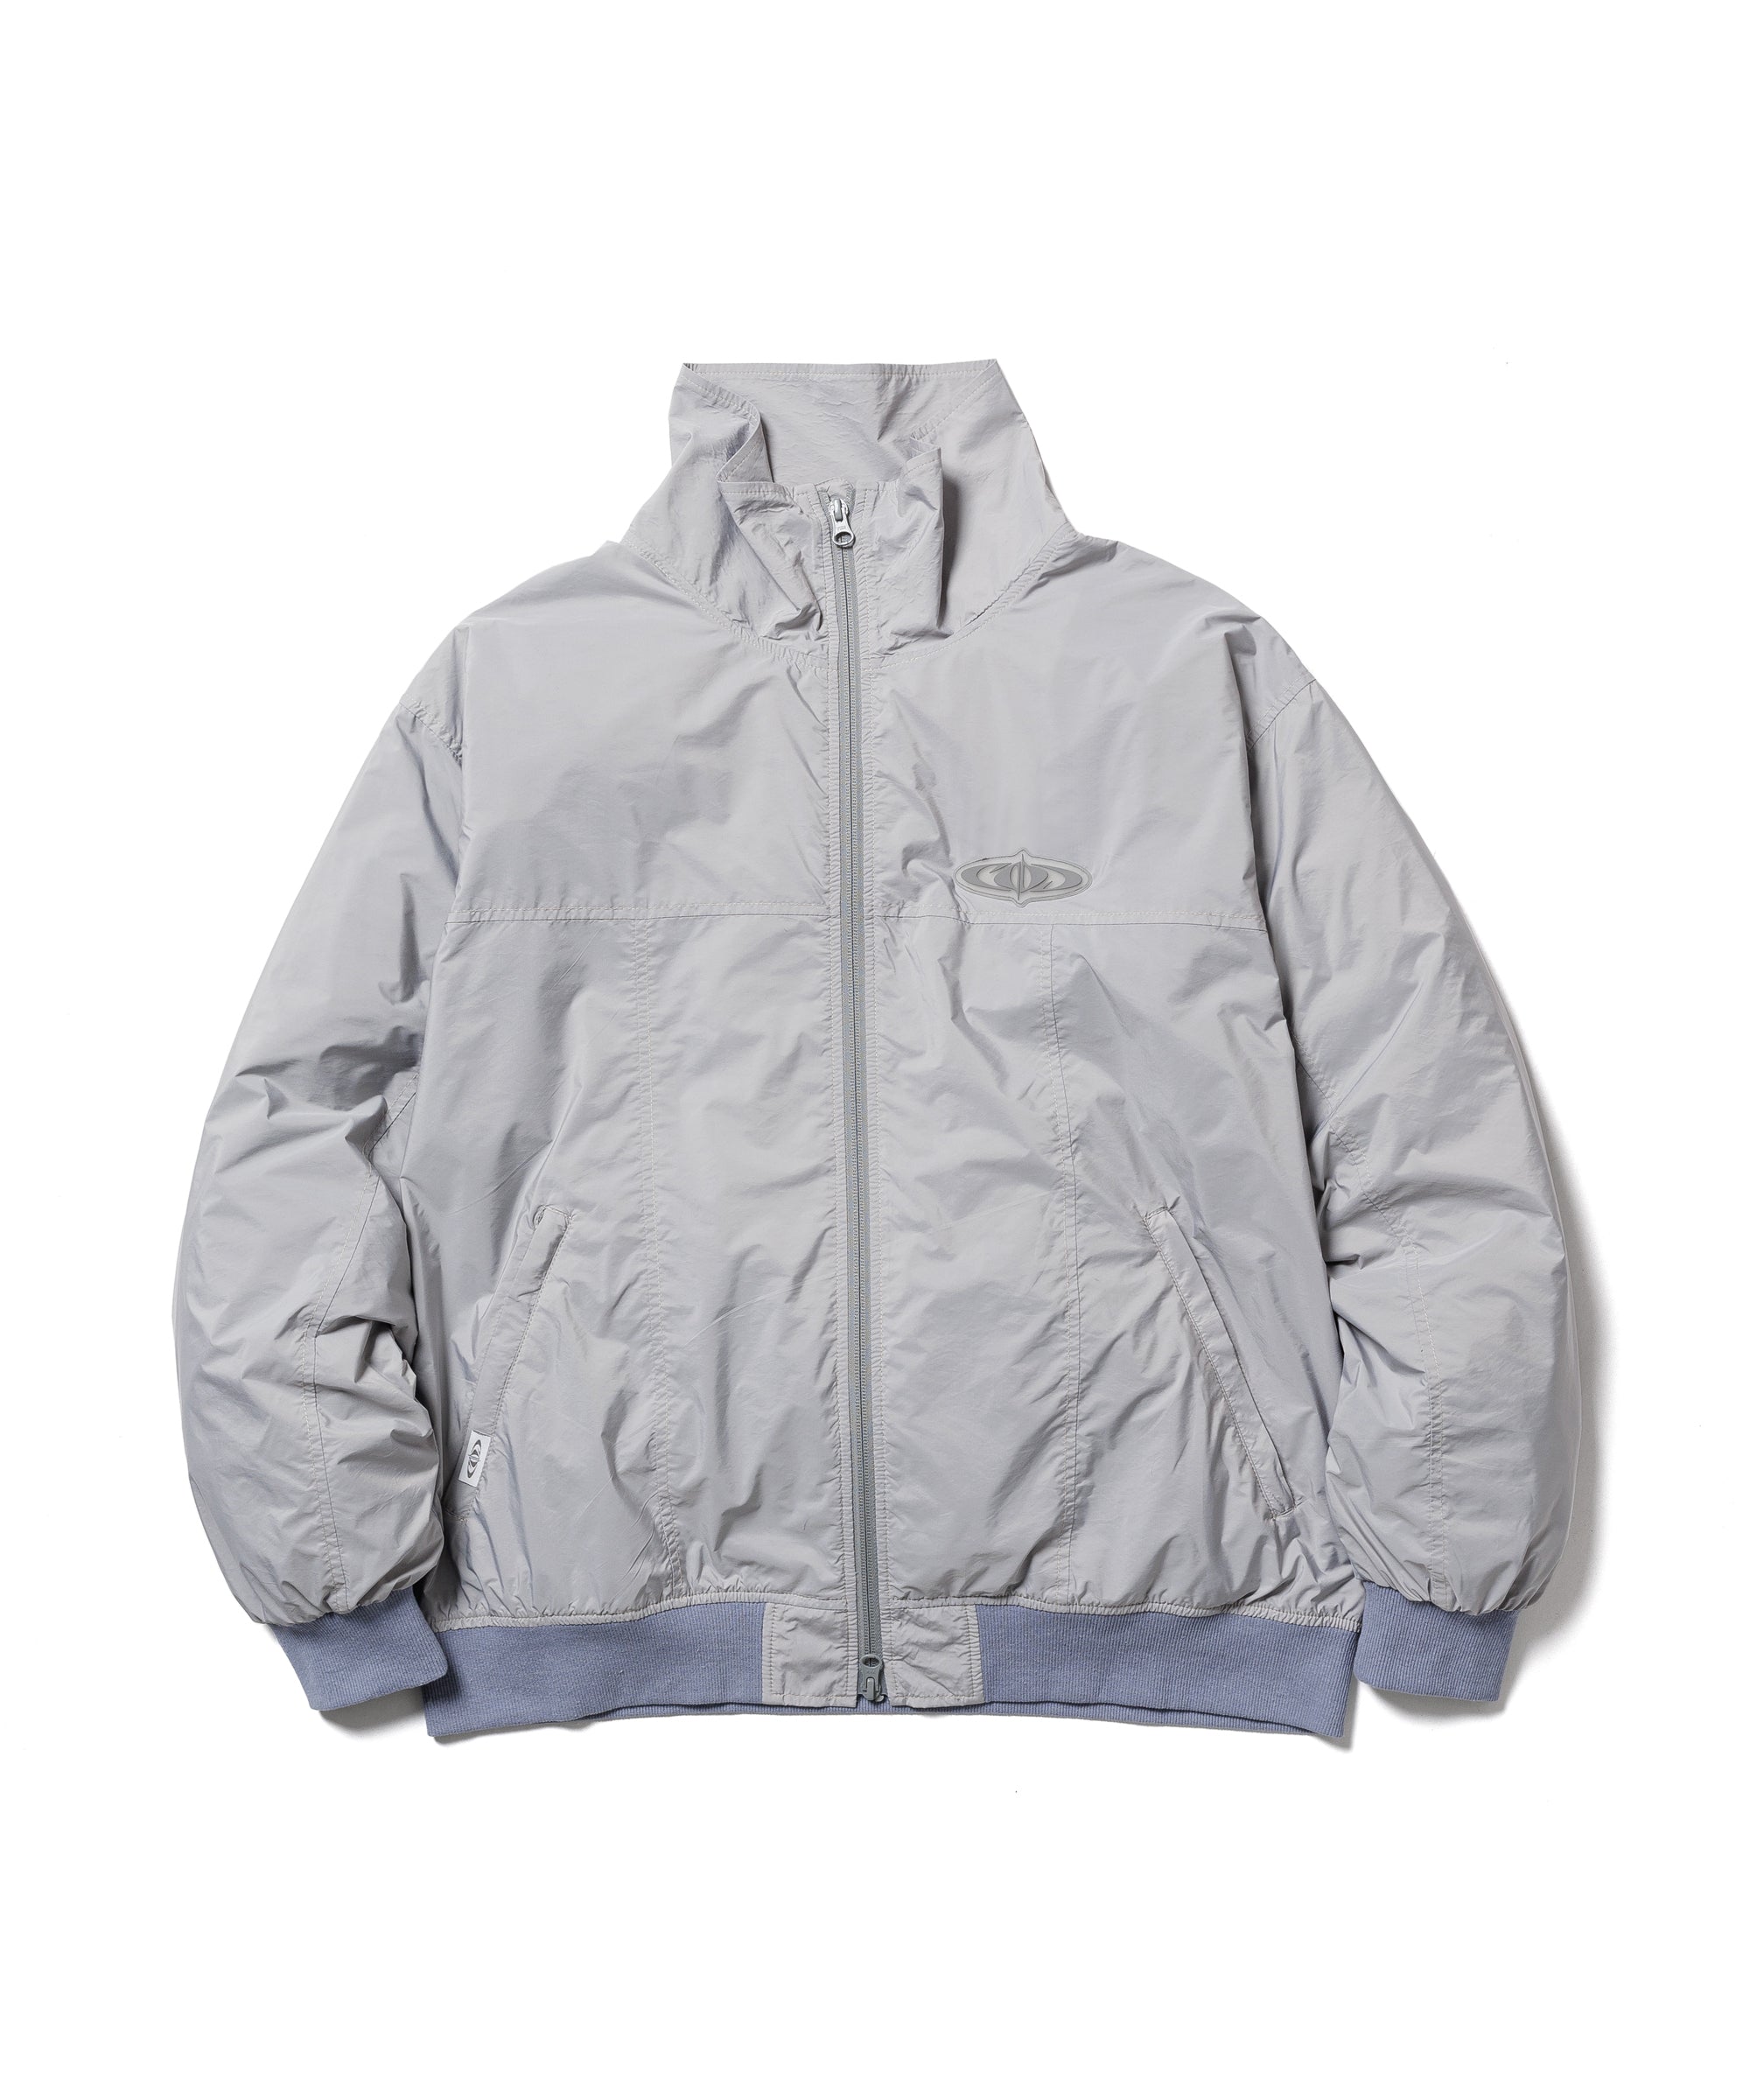 CPG STITCH TRACK JACKET 新品タグ付き